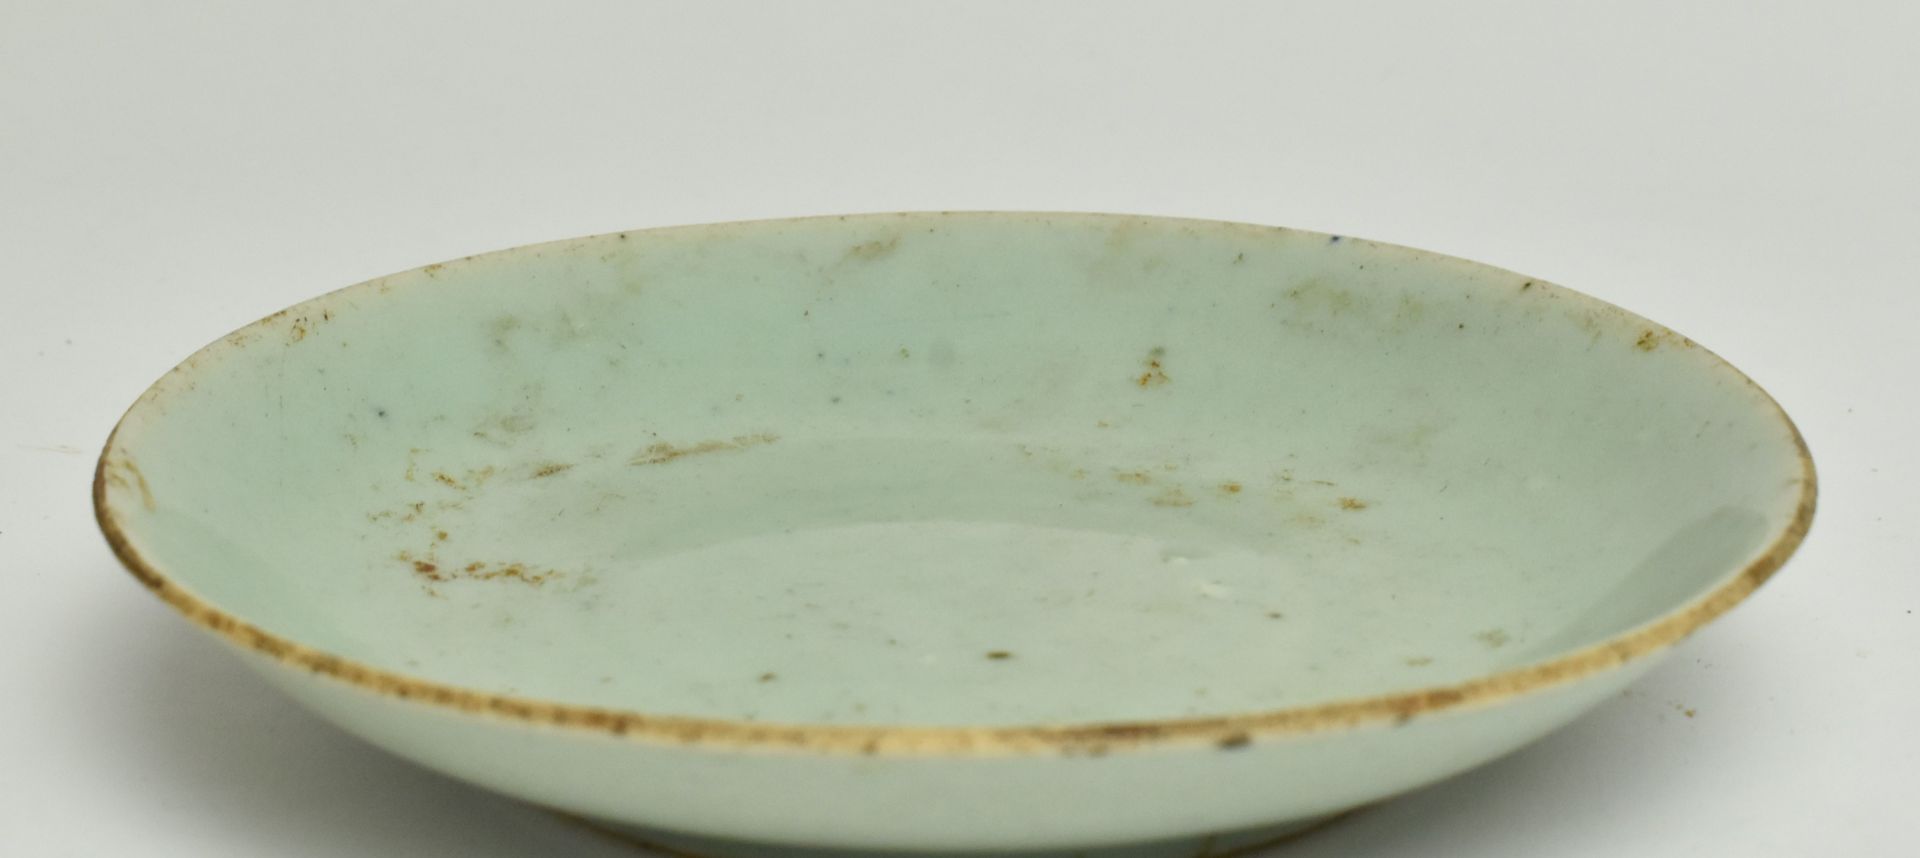 TWO QING DYNASTY CELADON GLAZED DISHES 清 青釉 盘子两个 - Image 3 of 7